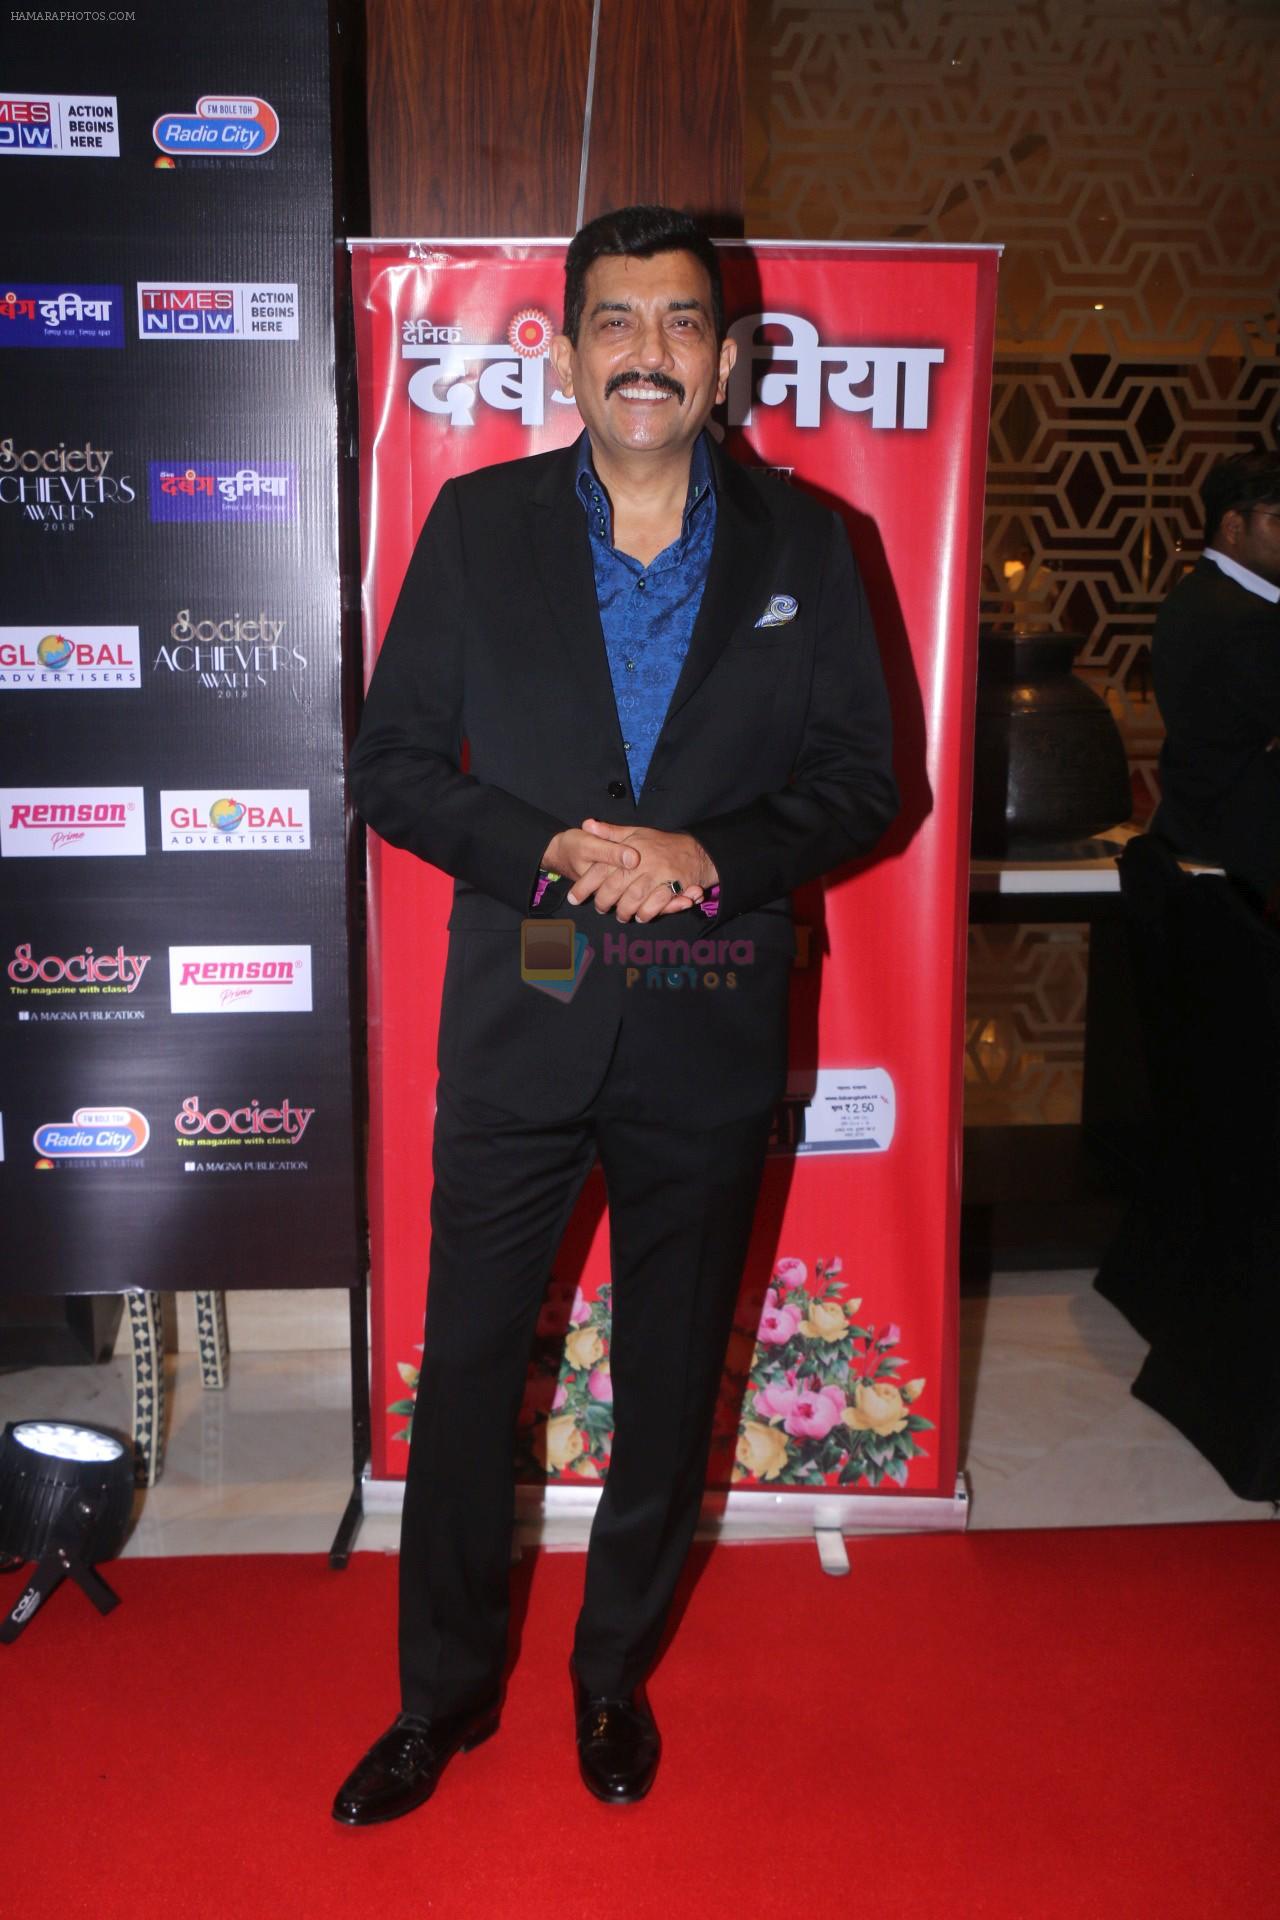 Sanjeev Kapoor attend Society Achievers Awards 2018 on 14th Jan 2018